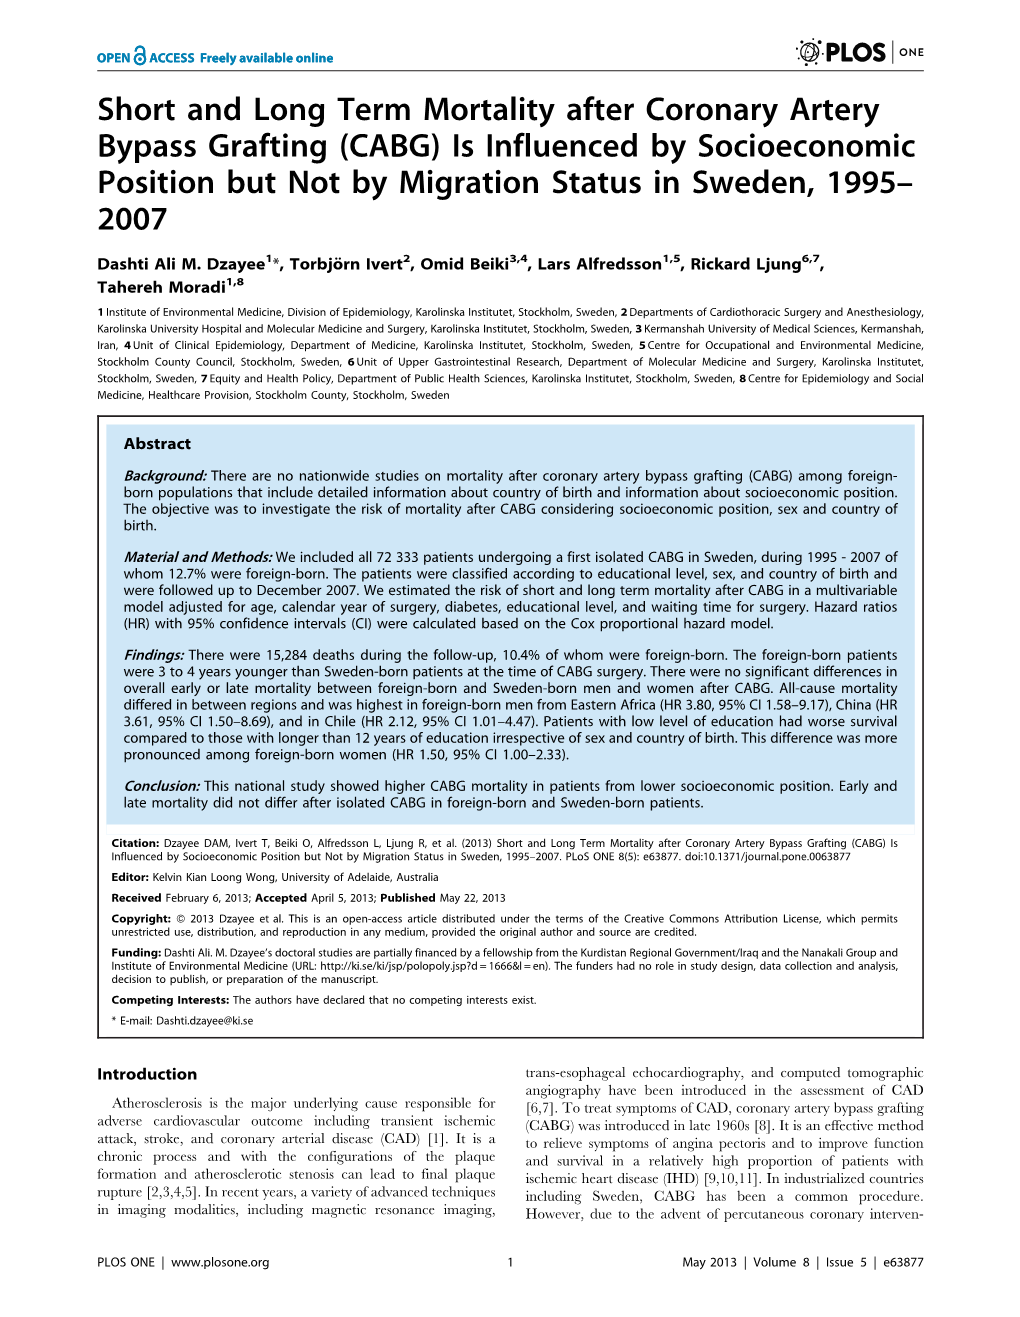 CABG) Is Influenced by Socioeconomic Position but Not by Migration Status in Sweden, 1995– 2007